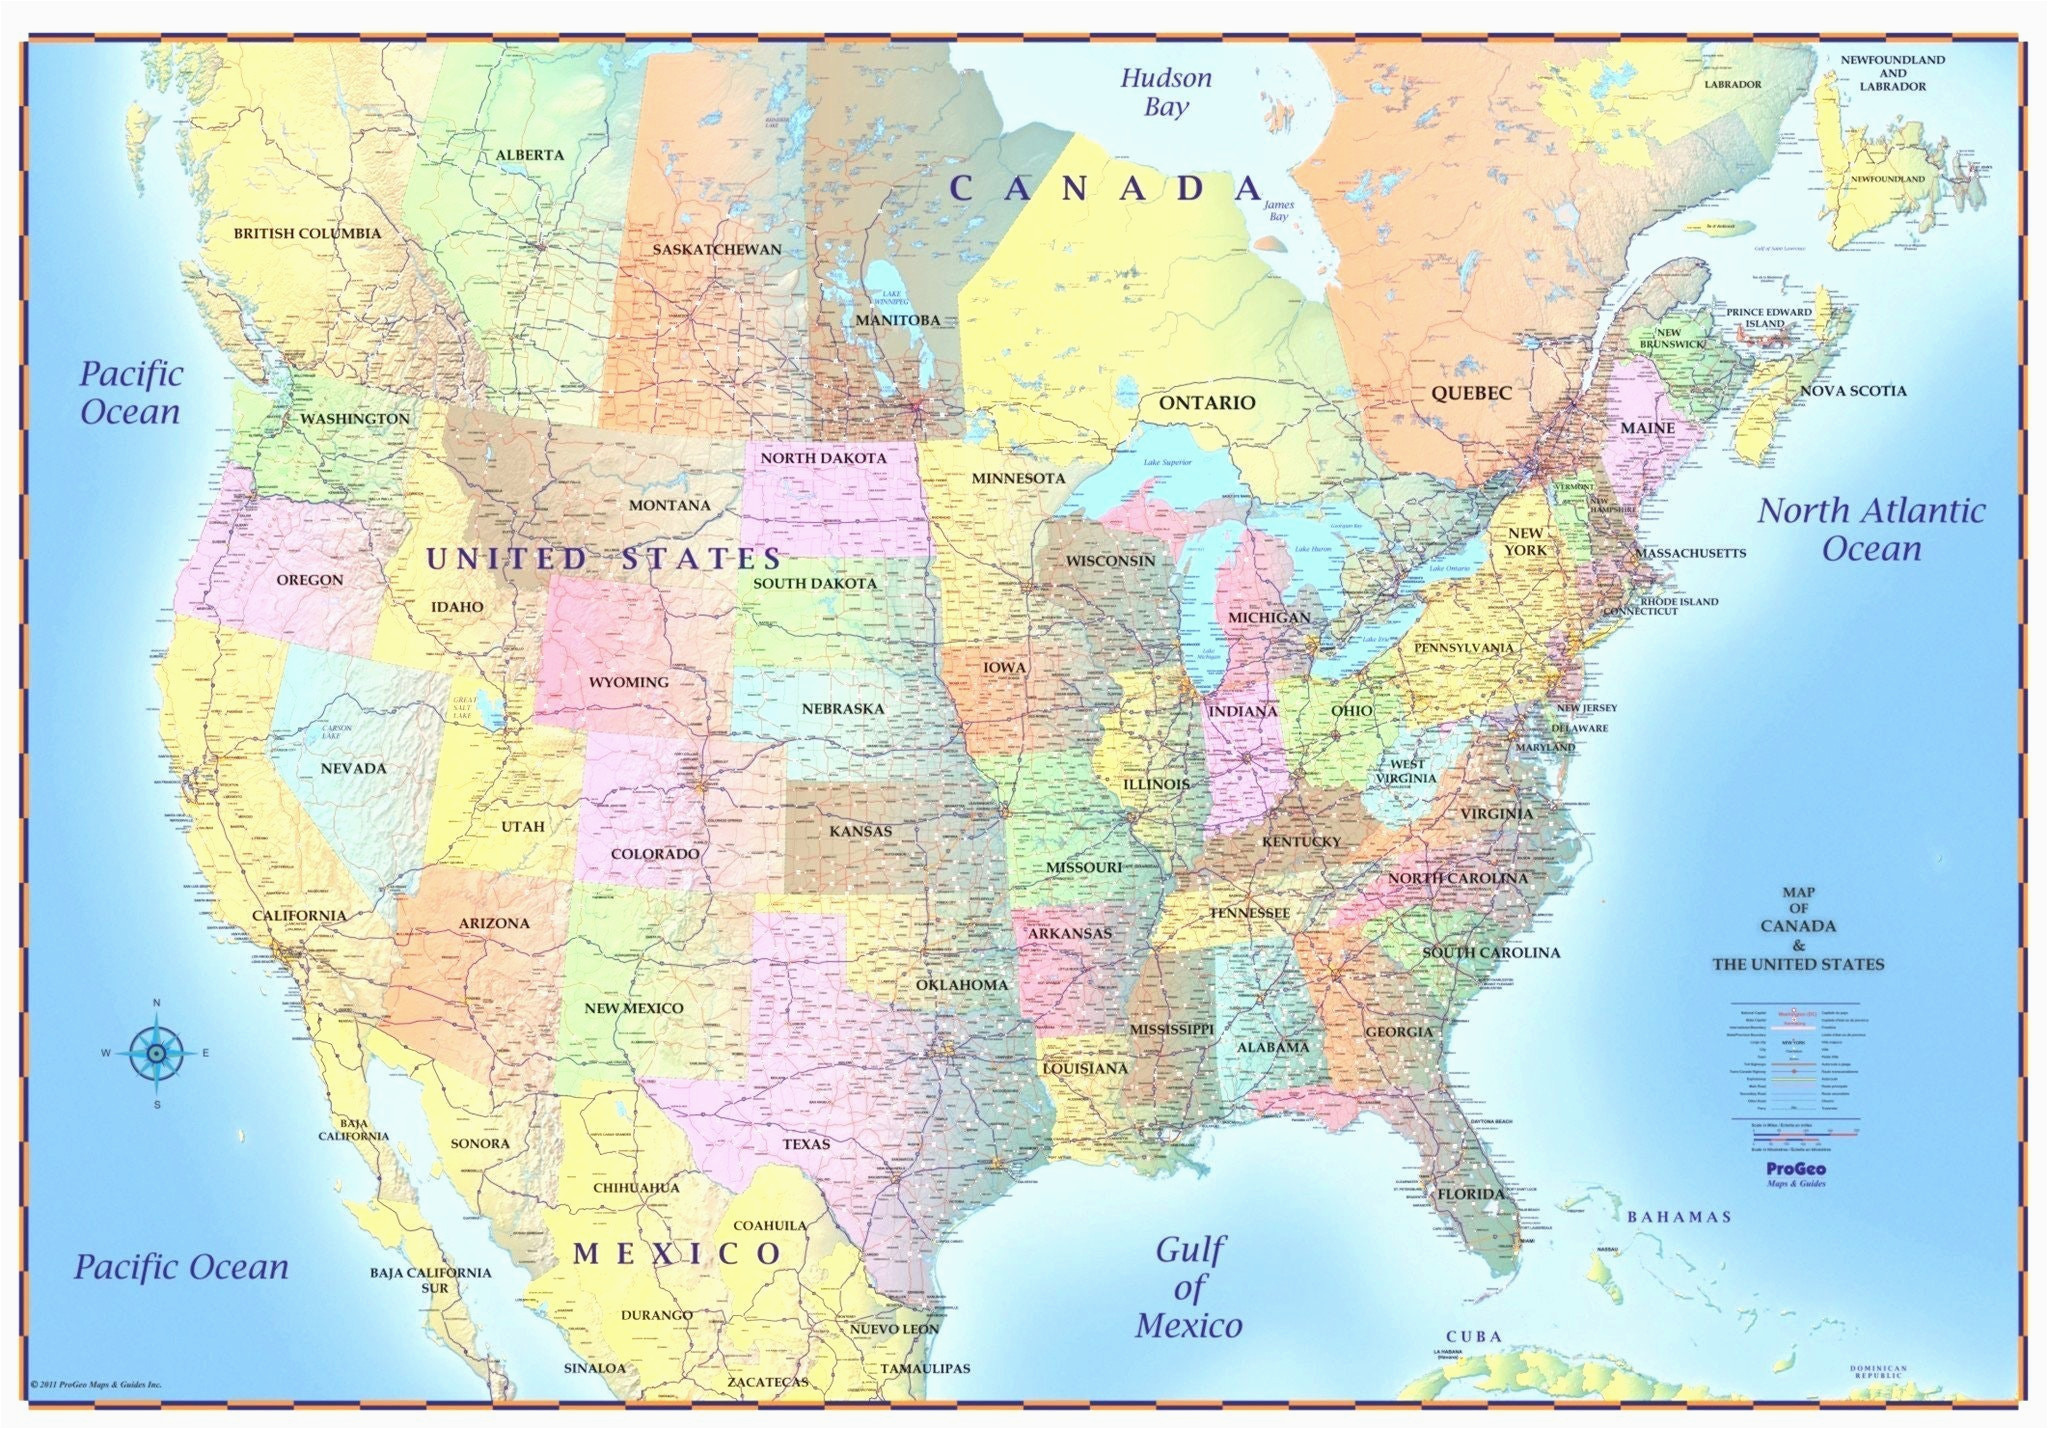 us and canada physical map quiz new refrence map canada us border